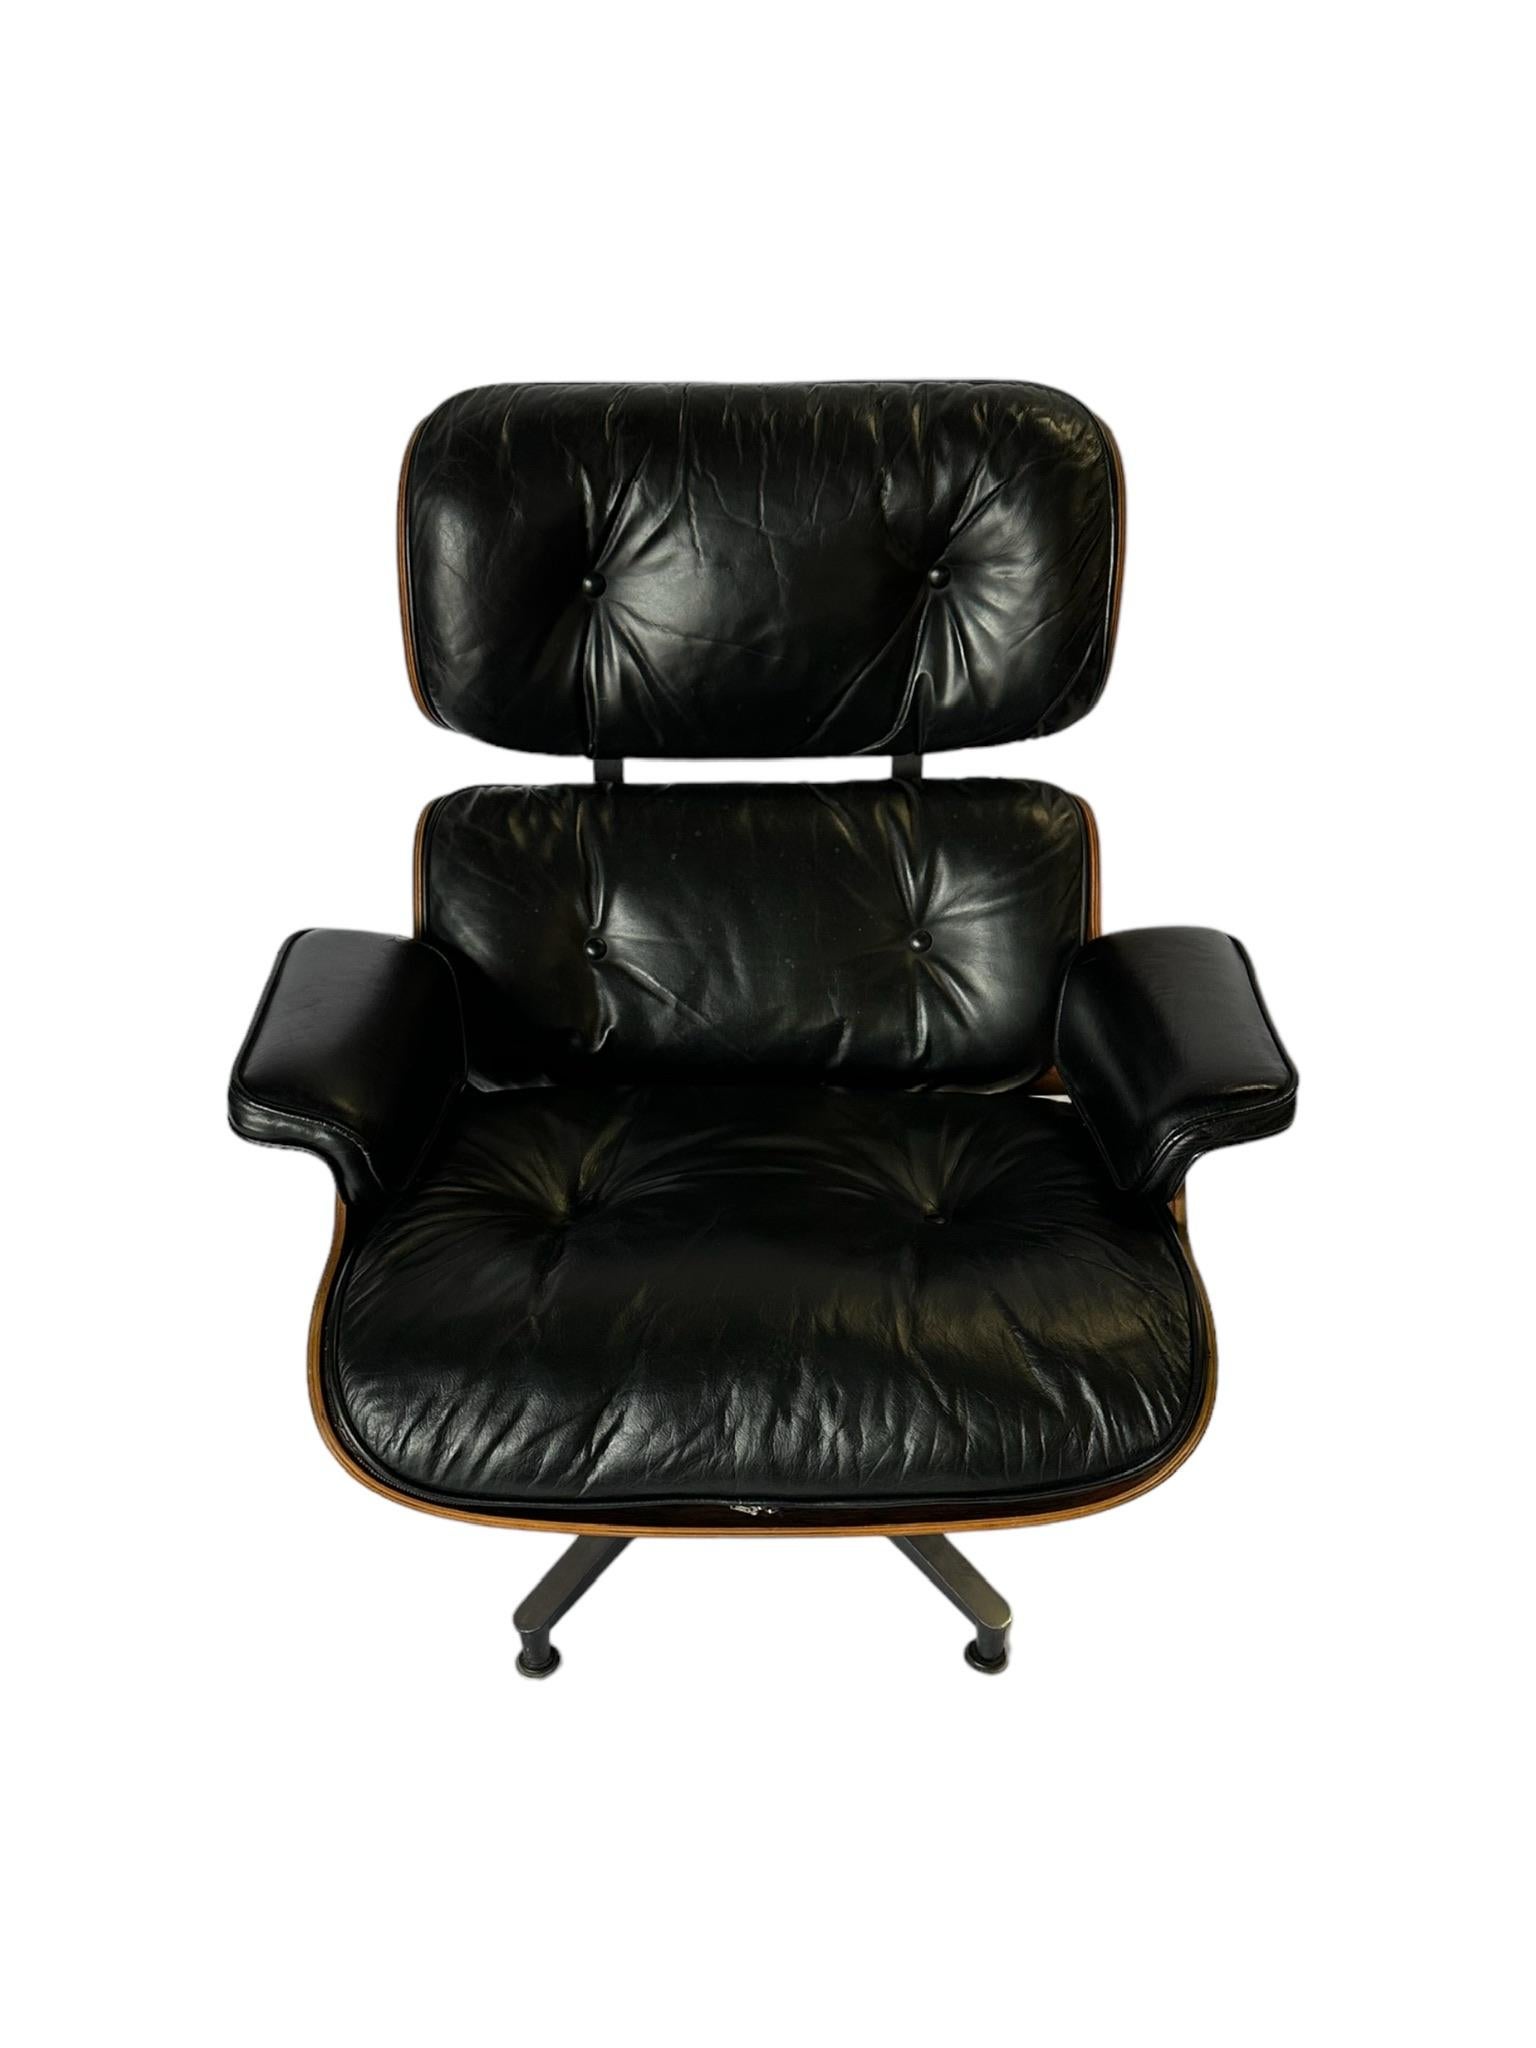 Restored Herman Miller Eames Lounge Chair and Ottoman 6